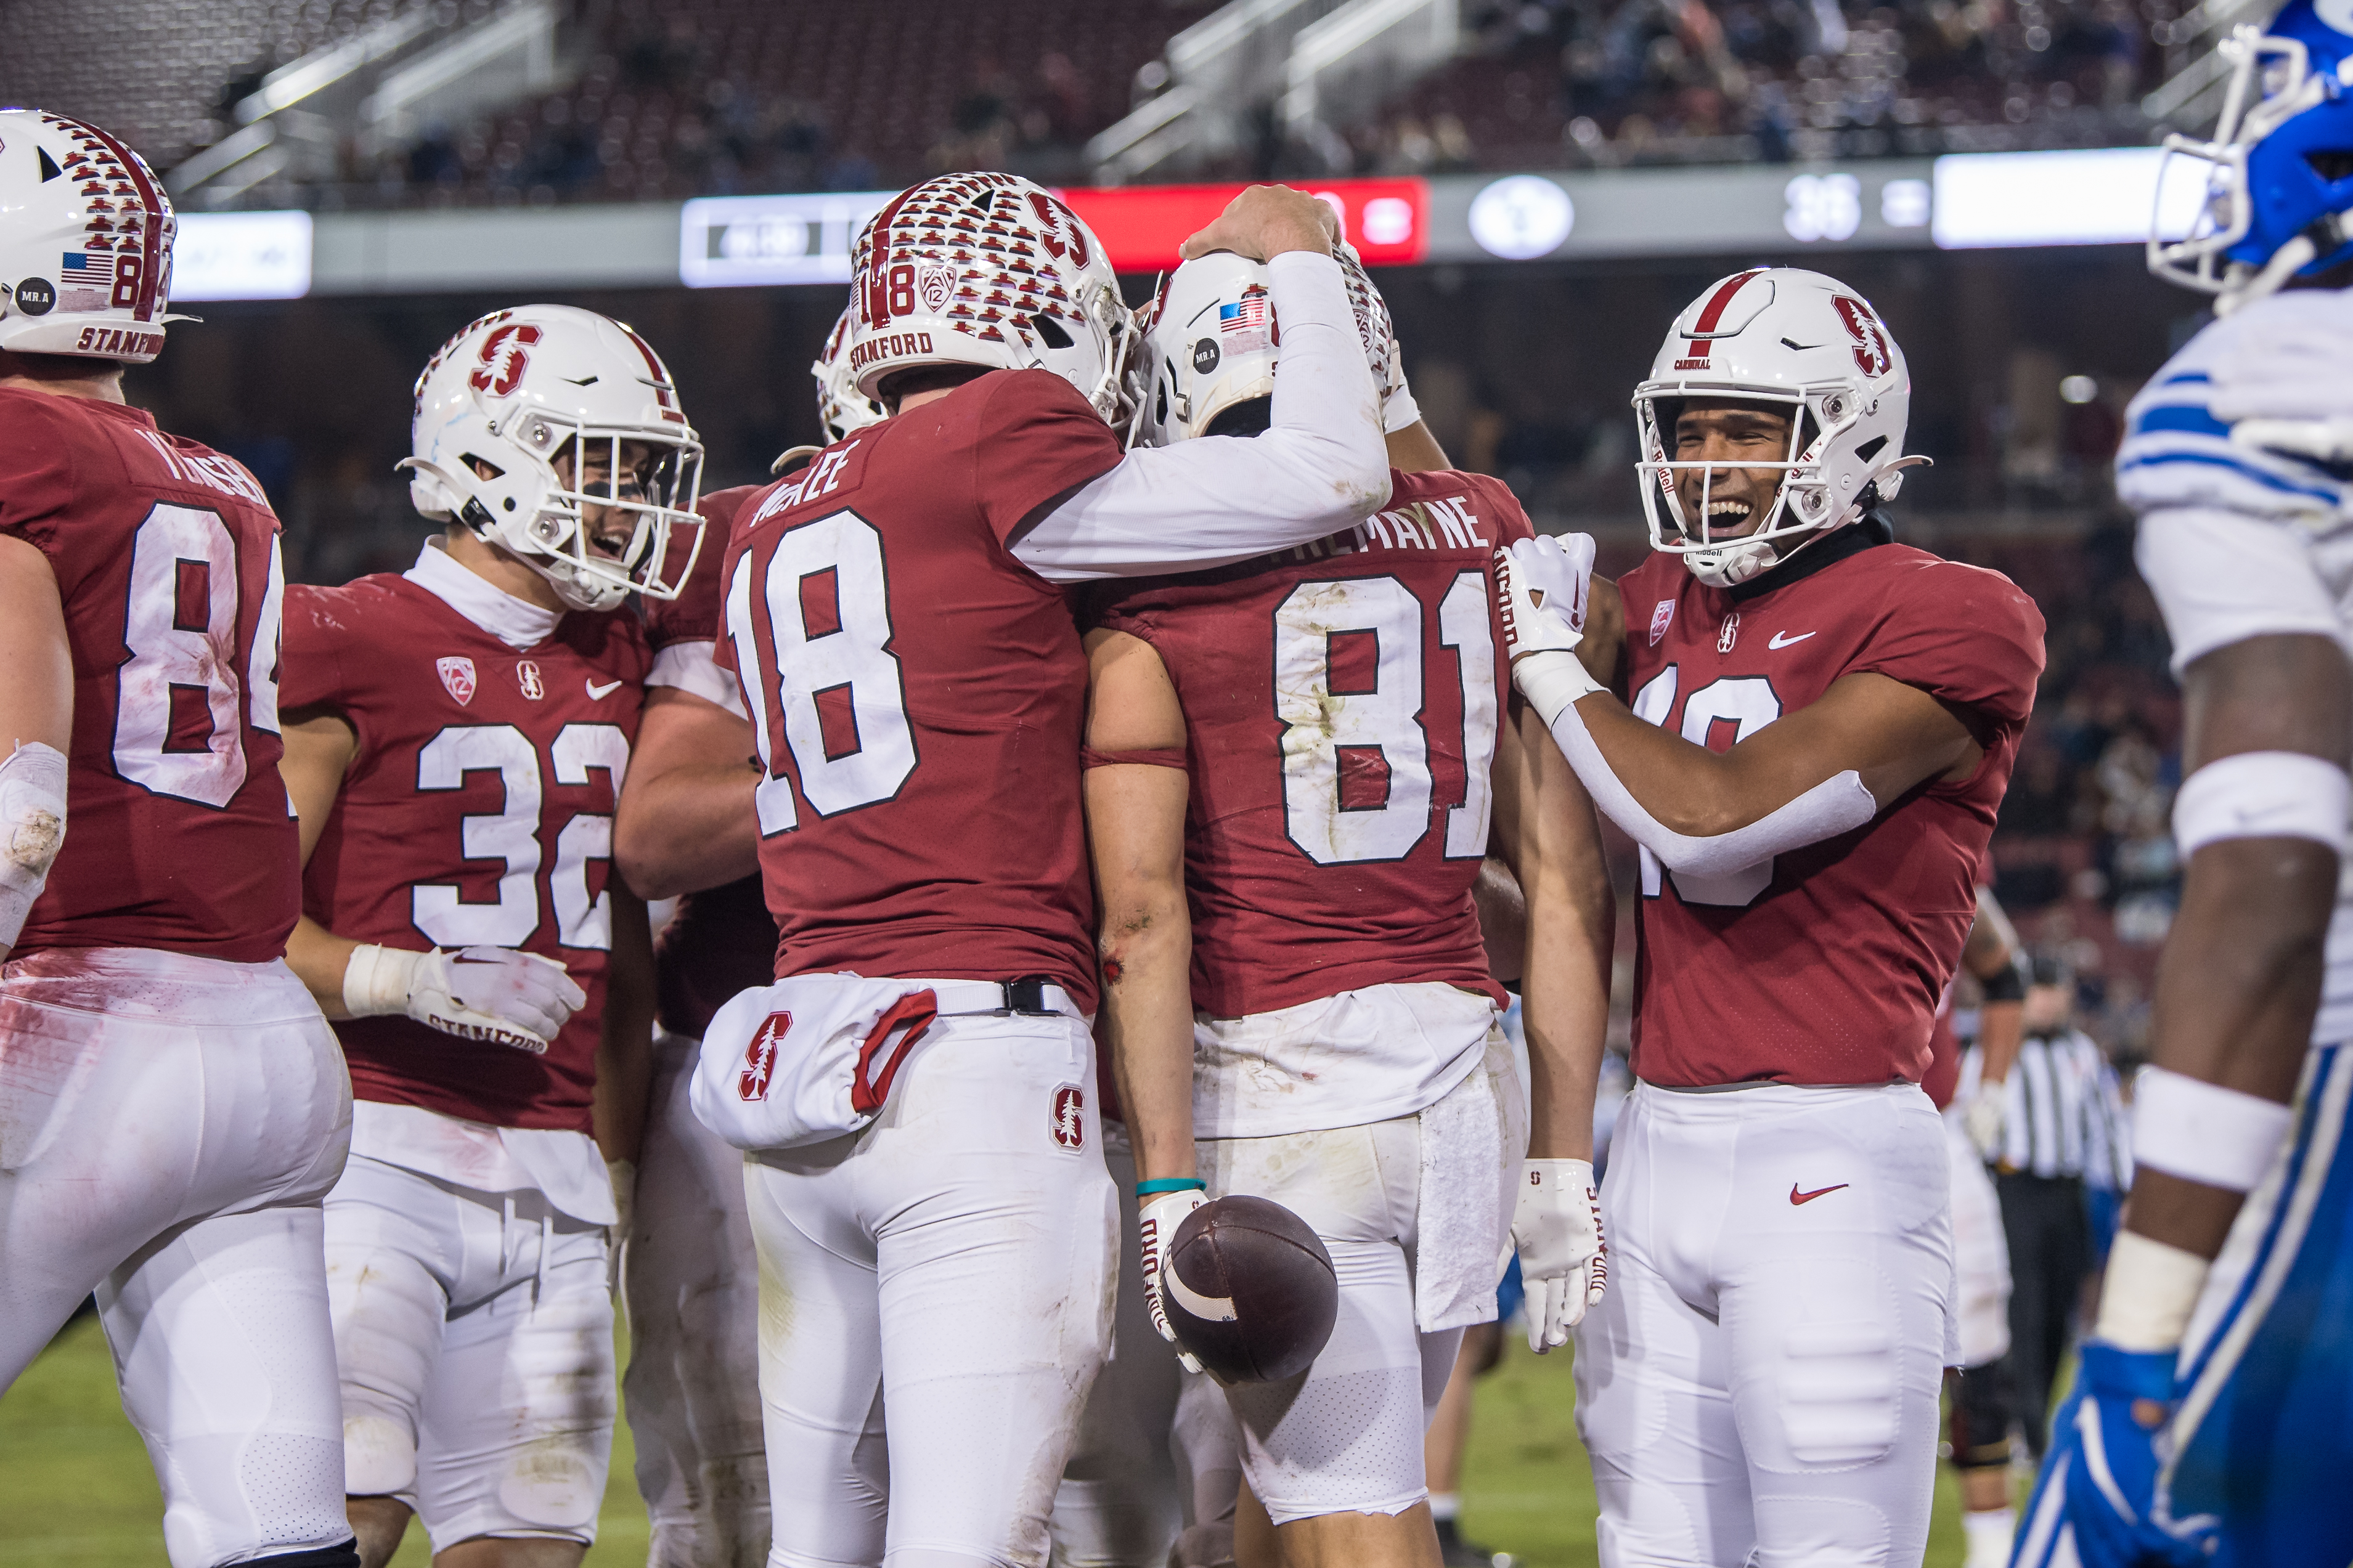 The Troy Taylor era is here What's next for Stanford football?